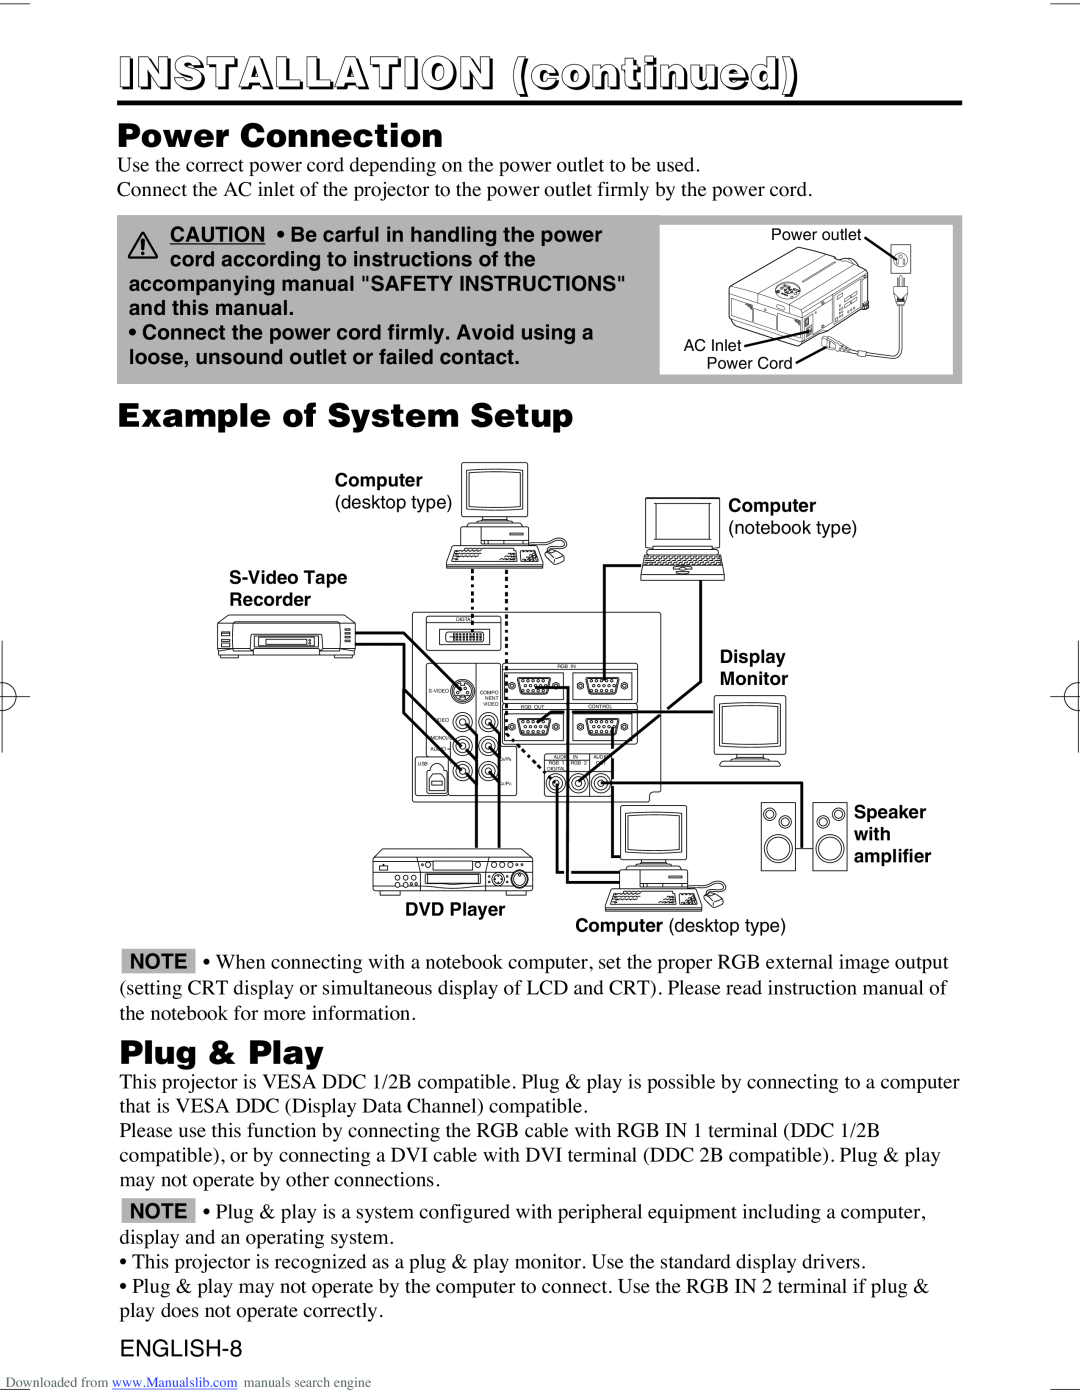 Hitachi CP-X995W user manual Power Connection, Example of System Setup, Plug & Play, INSTALLATION continued, ENGLISH-8 